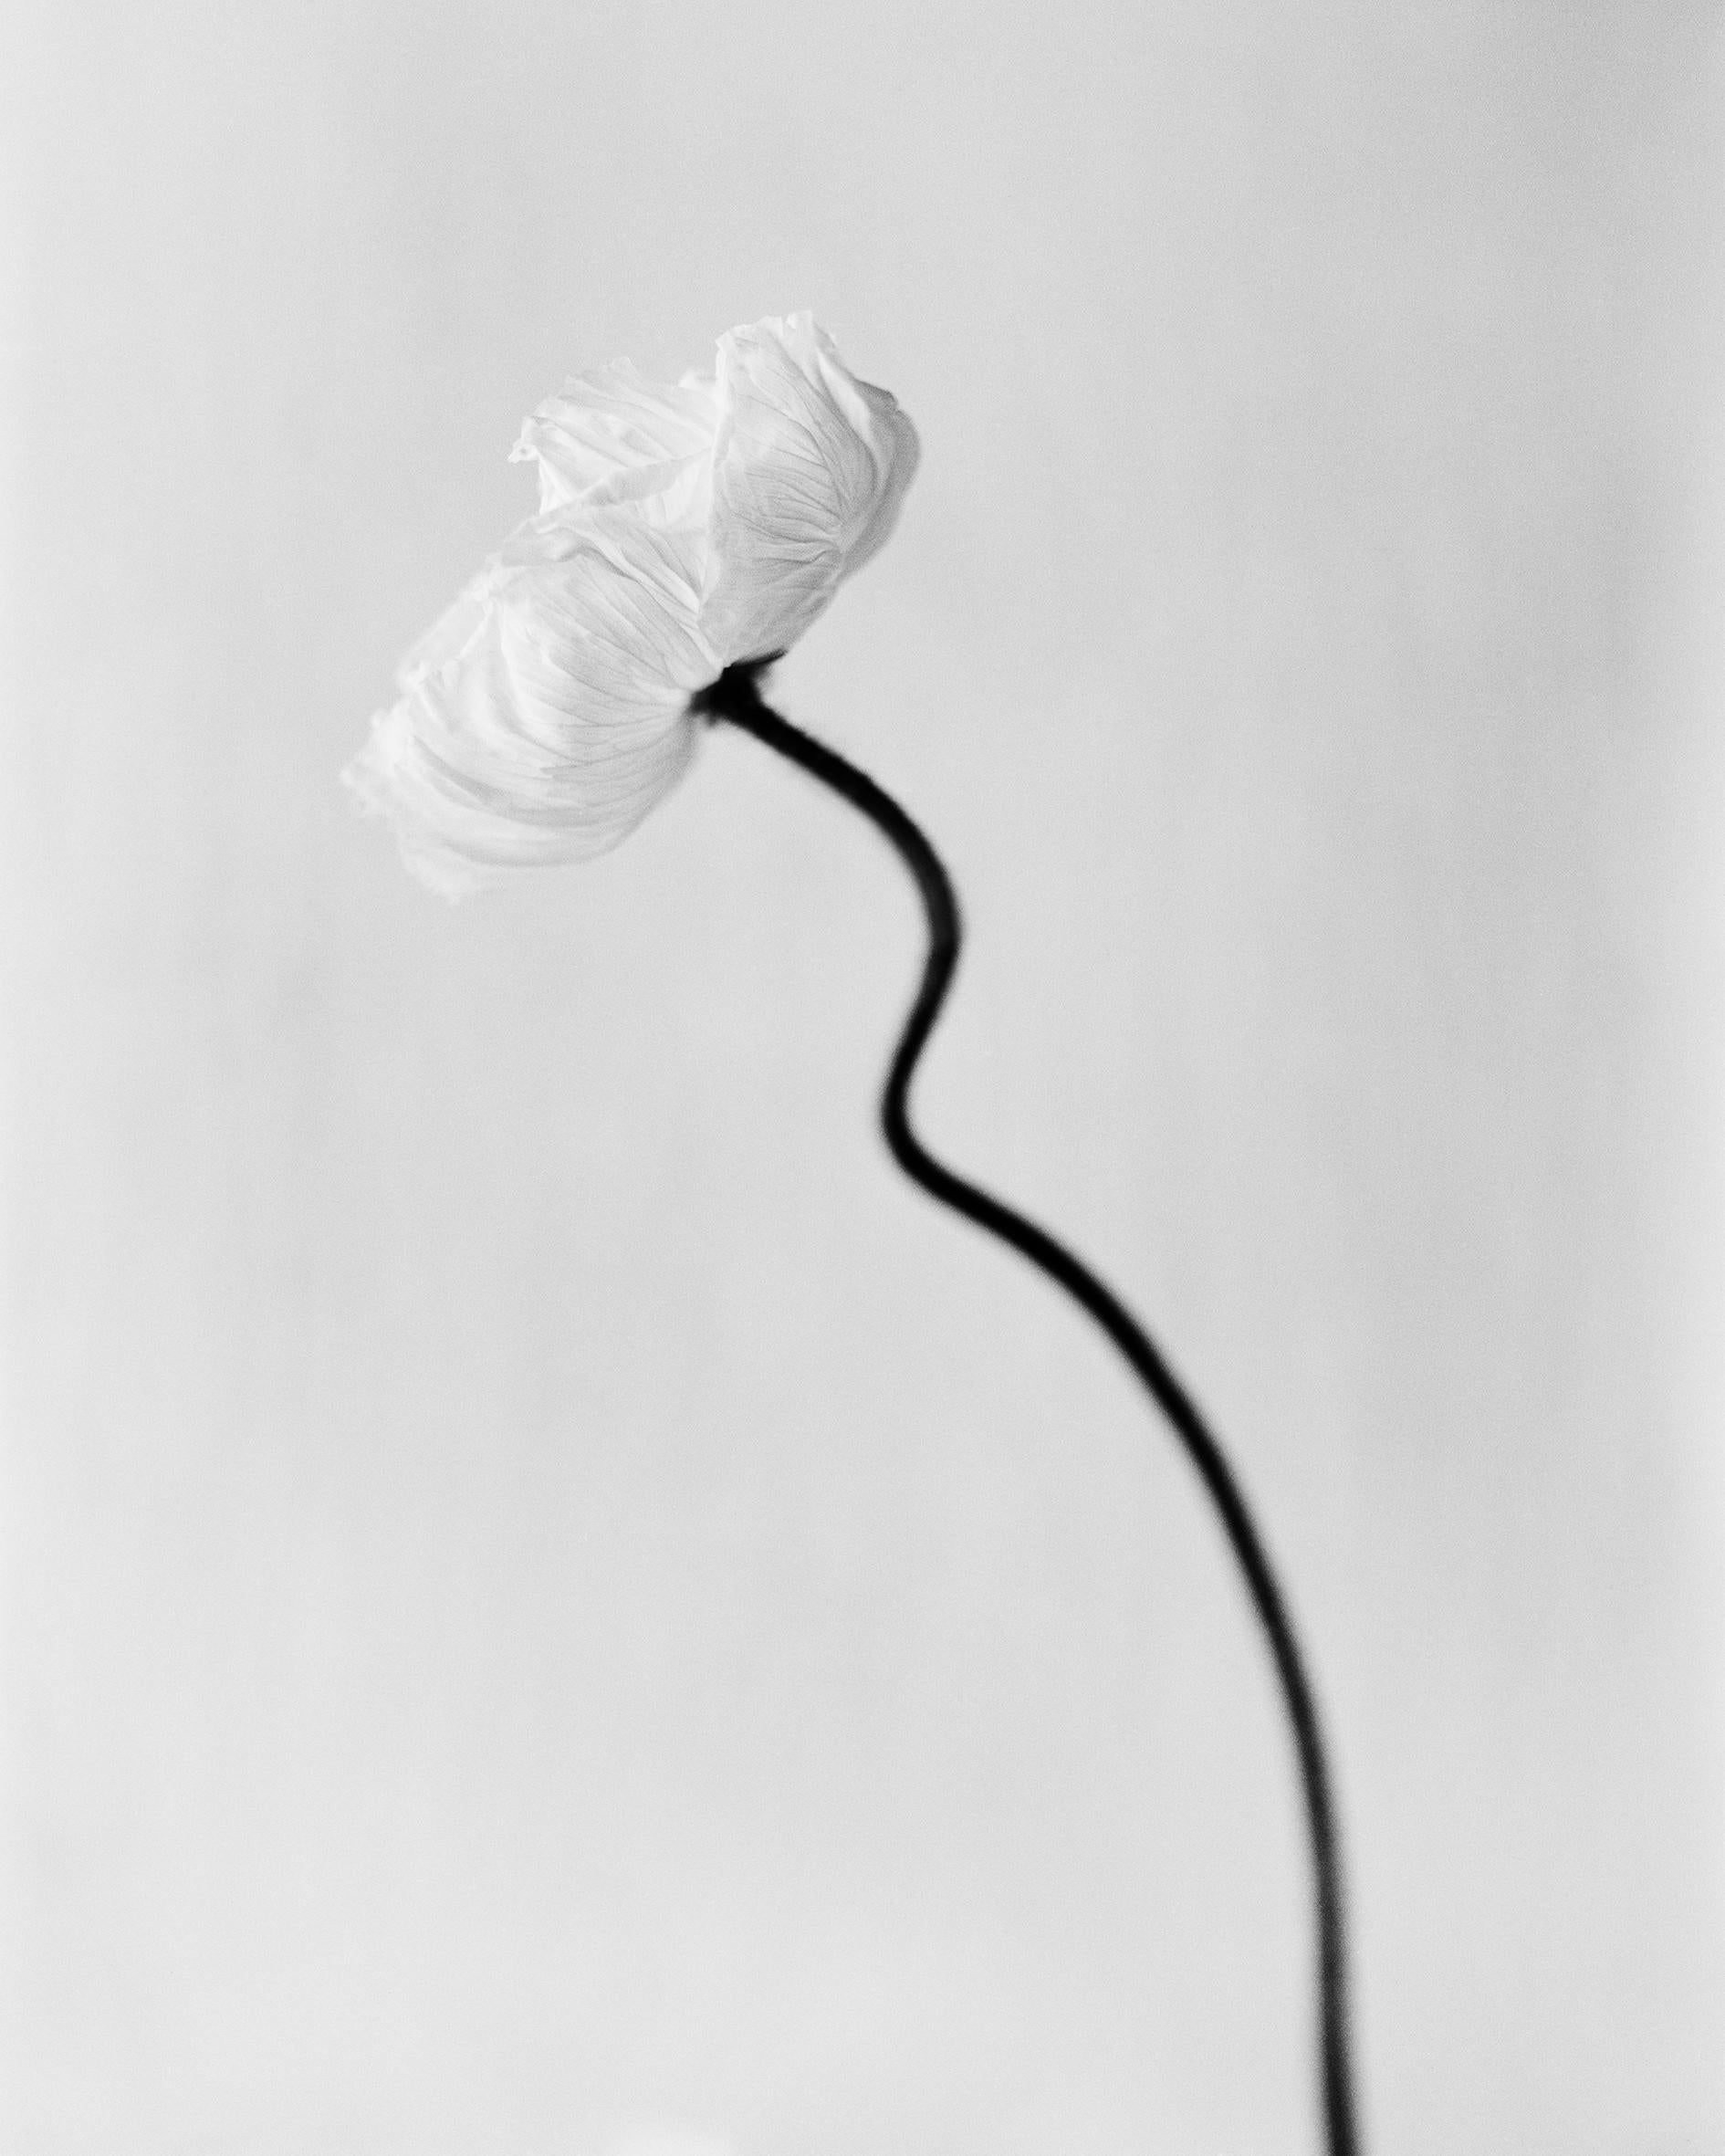 Ugne Pouwell Still-Life Photograph - Poppy bloom - Black and White analogue floral photography, Limited edition of 10